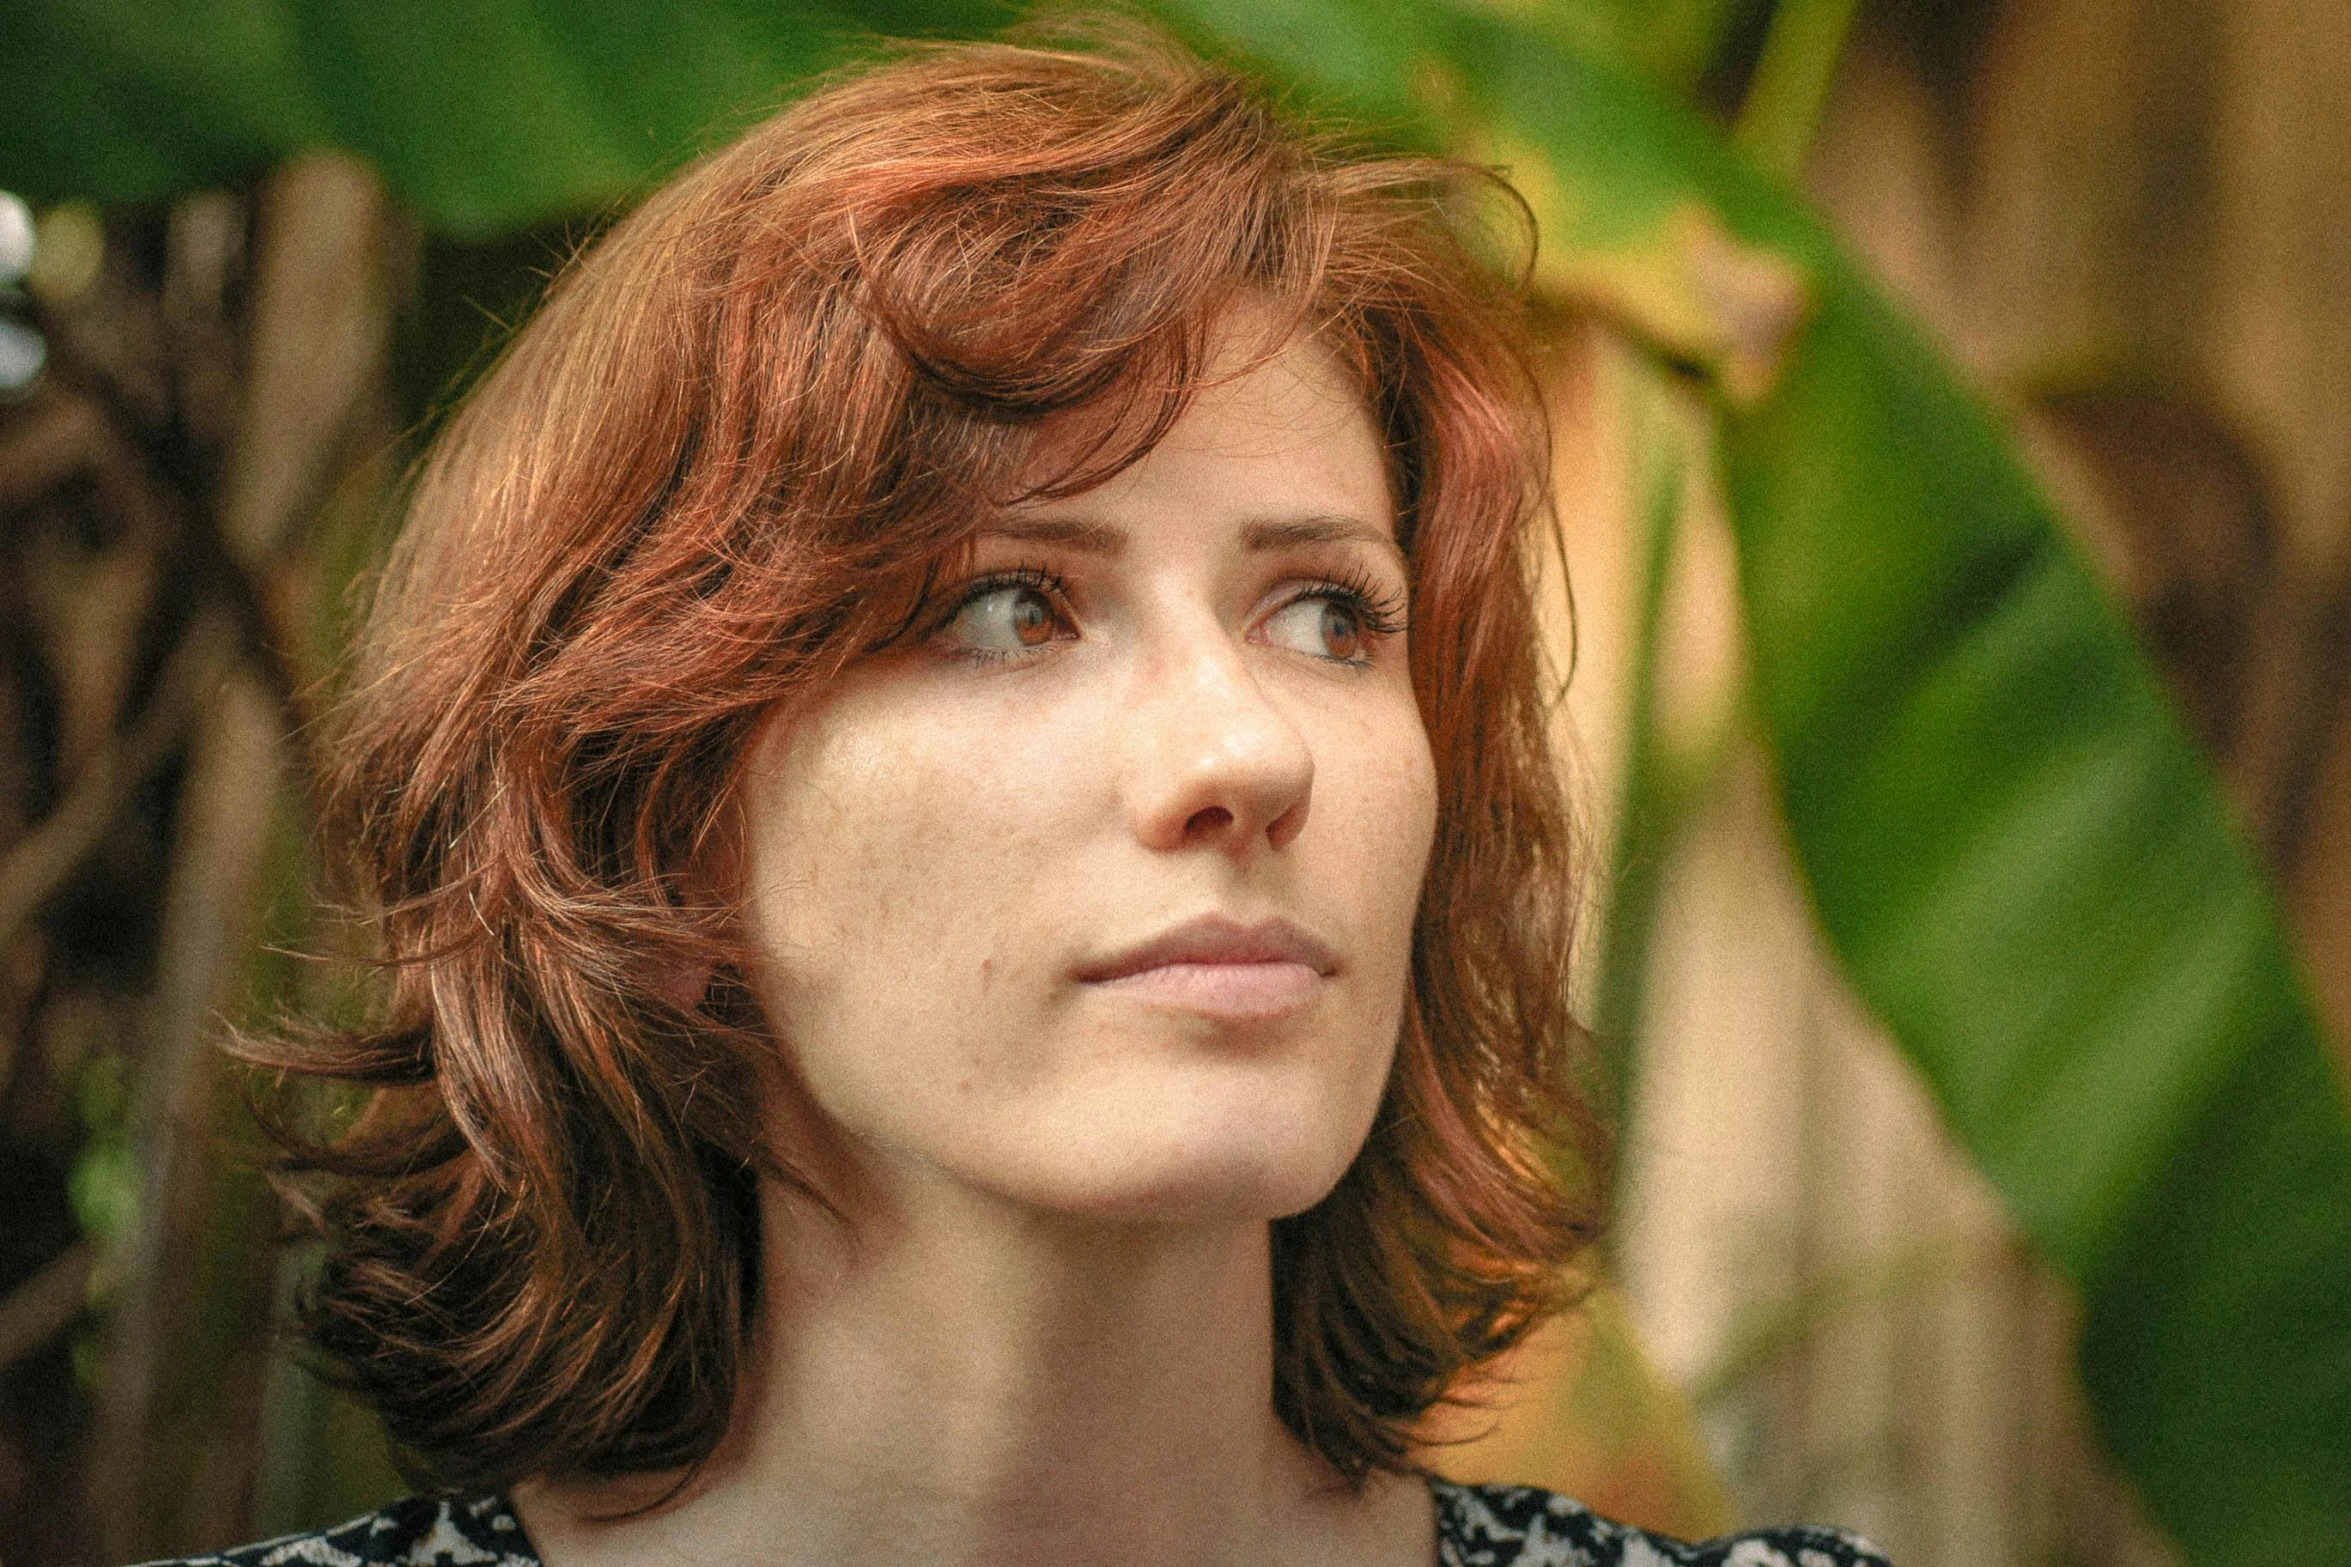 woman with shoulder length red hair staring intently at soing